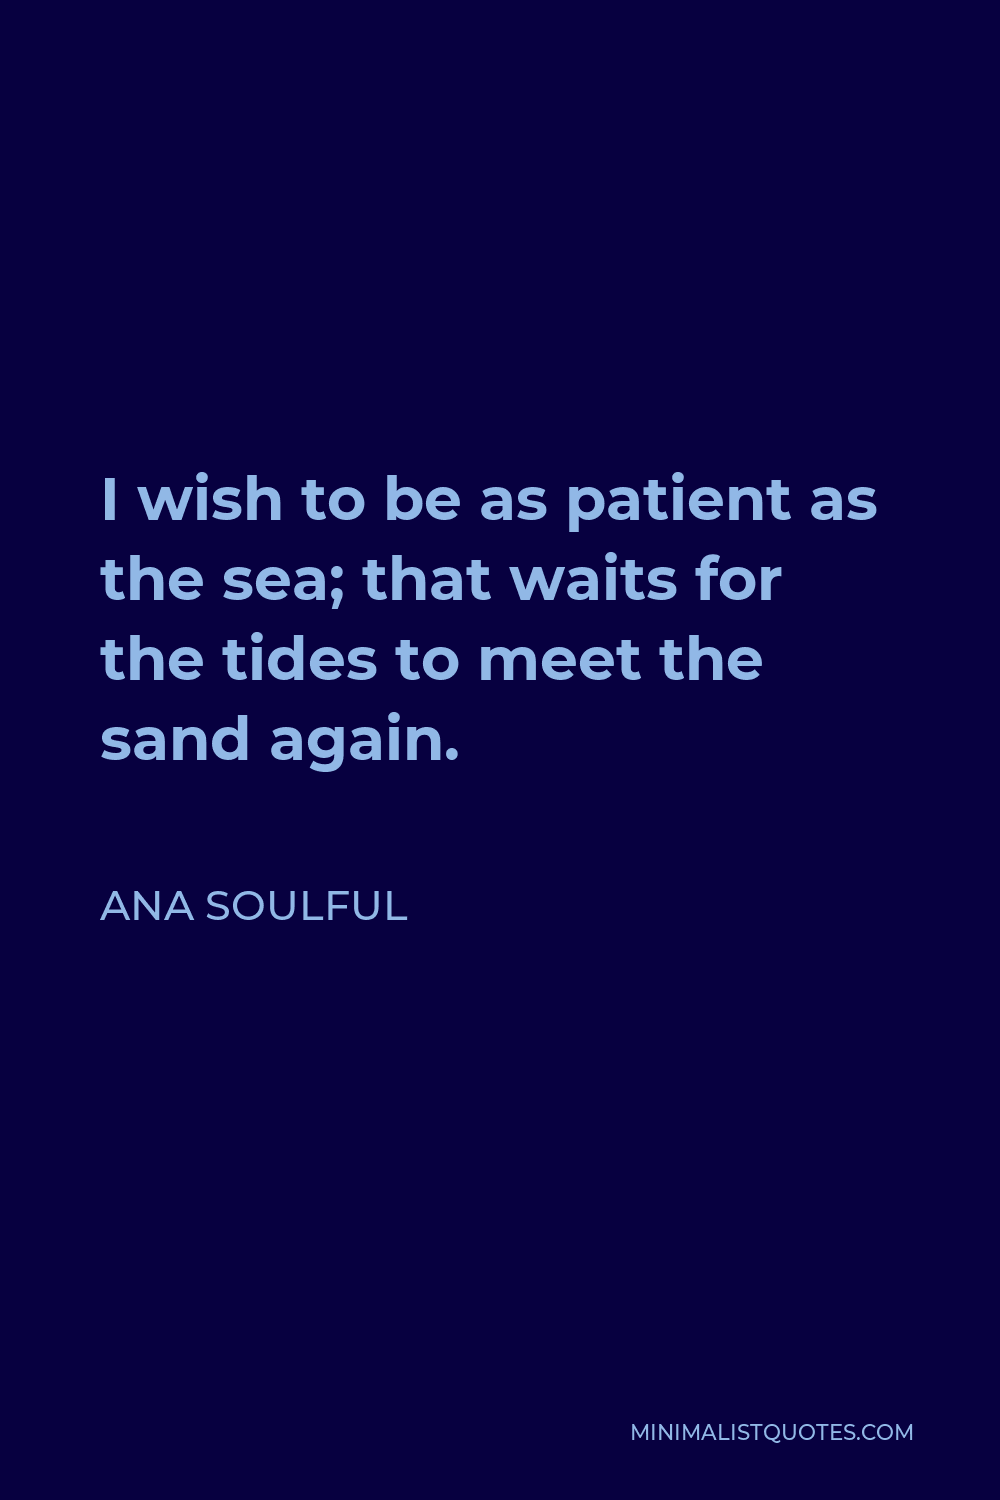 Ana Soulful Quote - I wish to be as patient as the sea; that waits for the tides to meet the sand again.